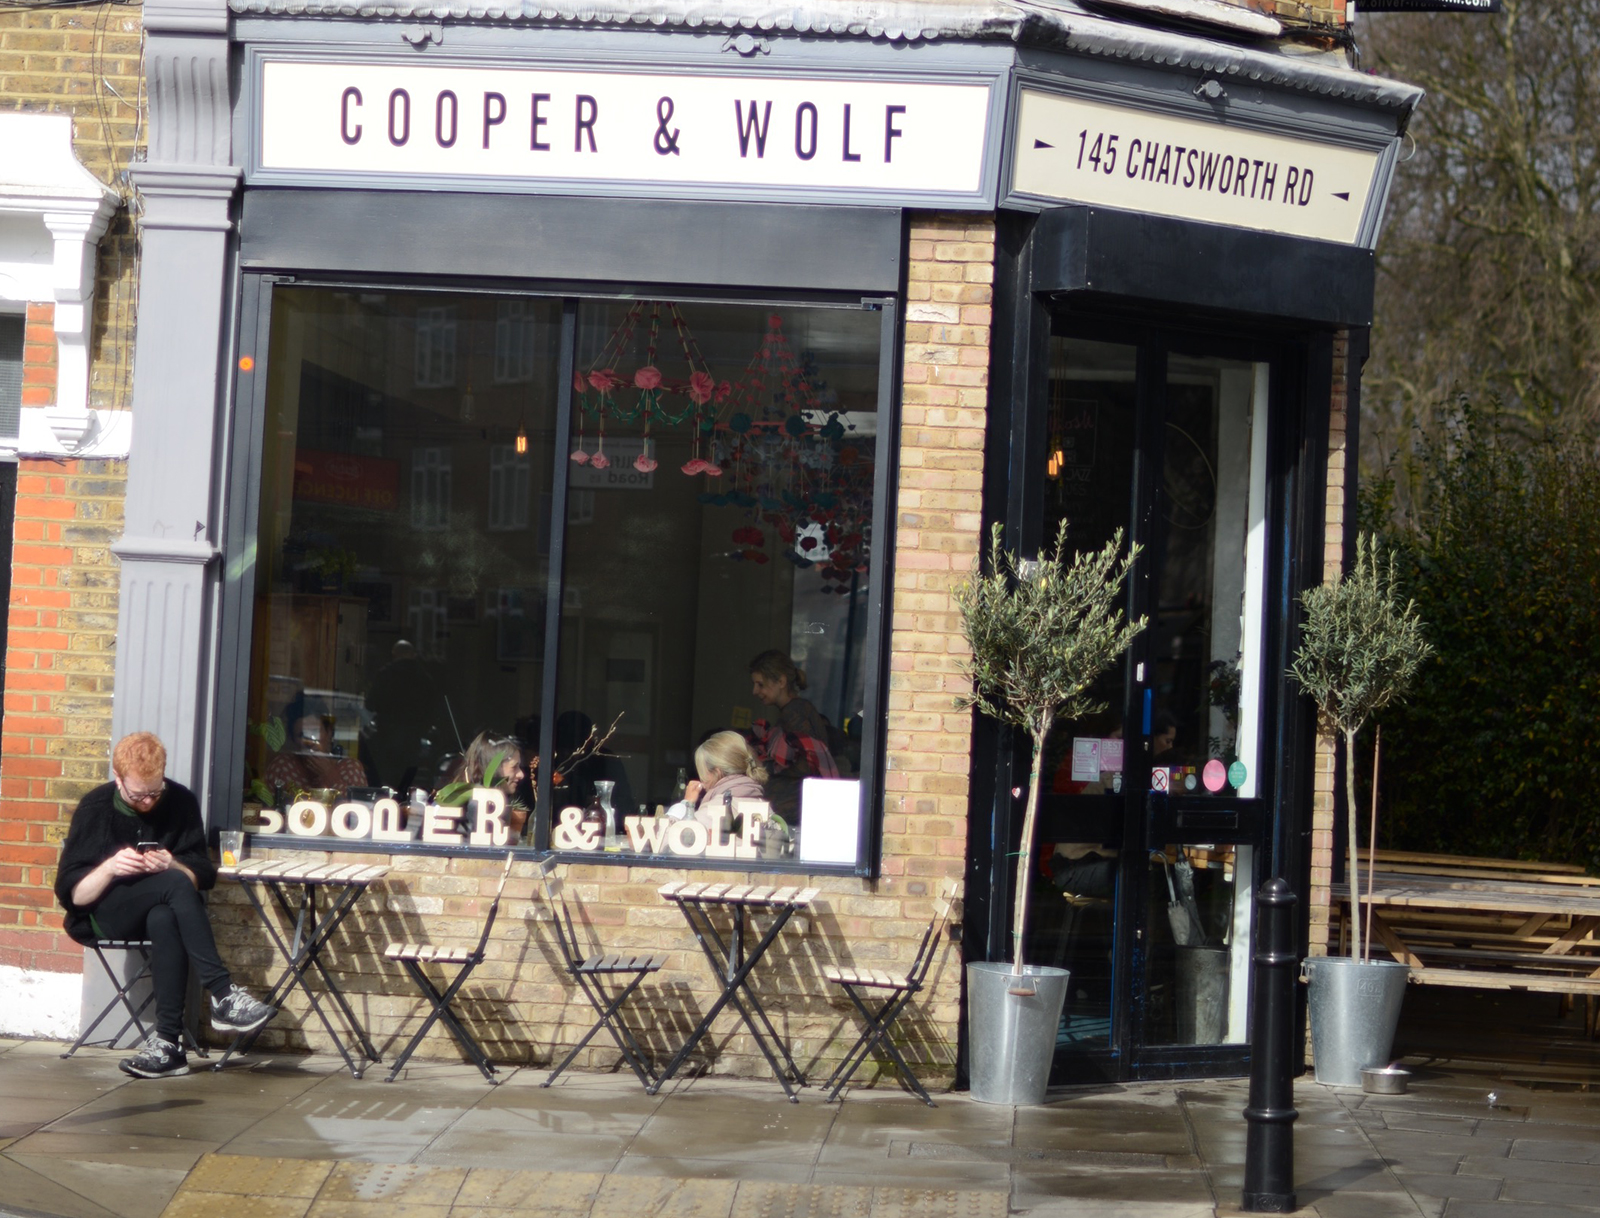 clapton shopping guide with lifestyle bloggers sara delaney and julia rebaudo featuring cooper & wolf restaurant